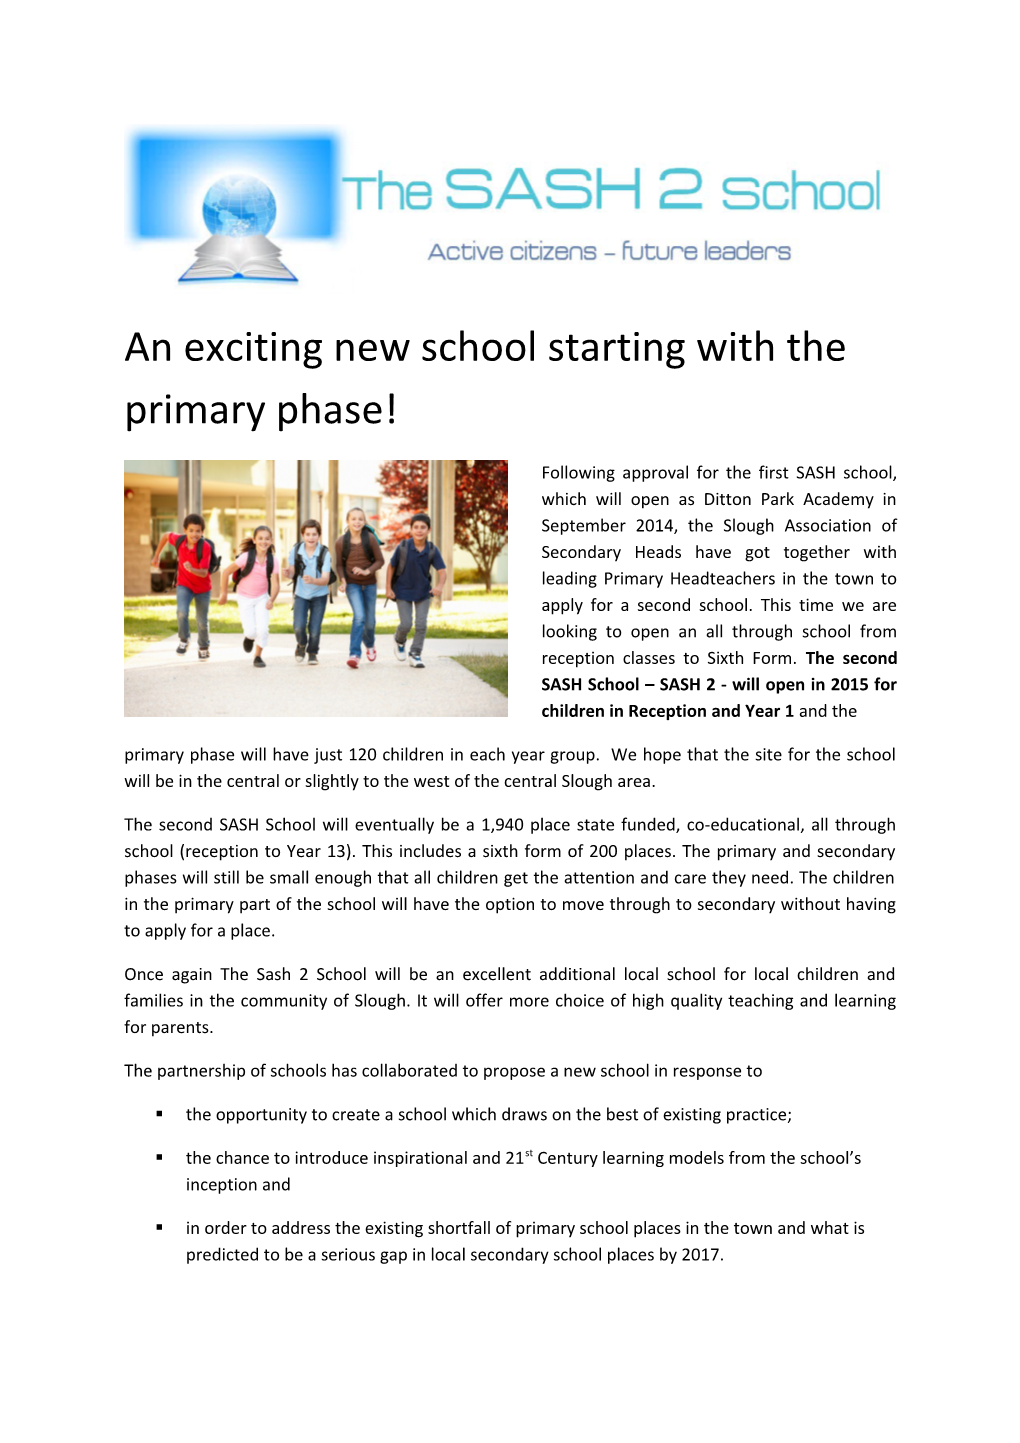 An Exciting New School Starting with the Primary Phase!